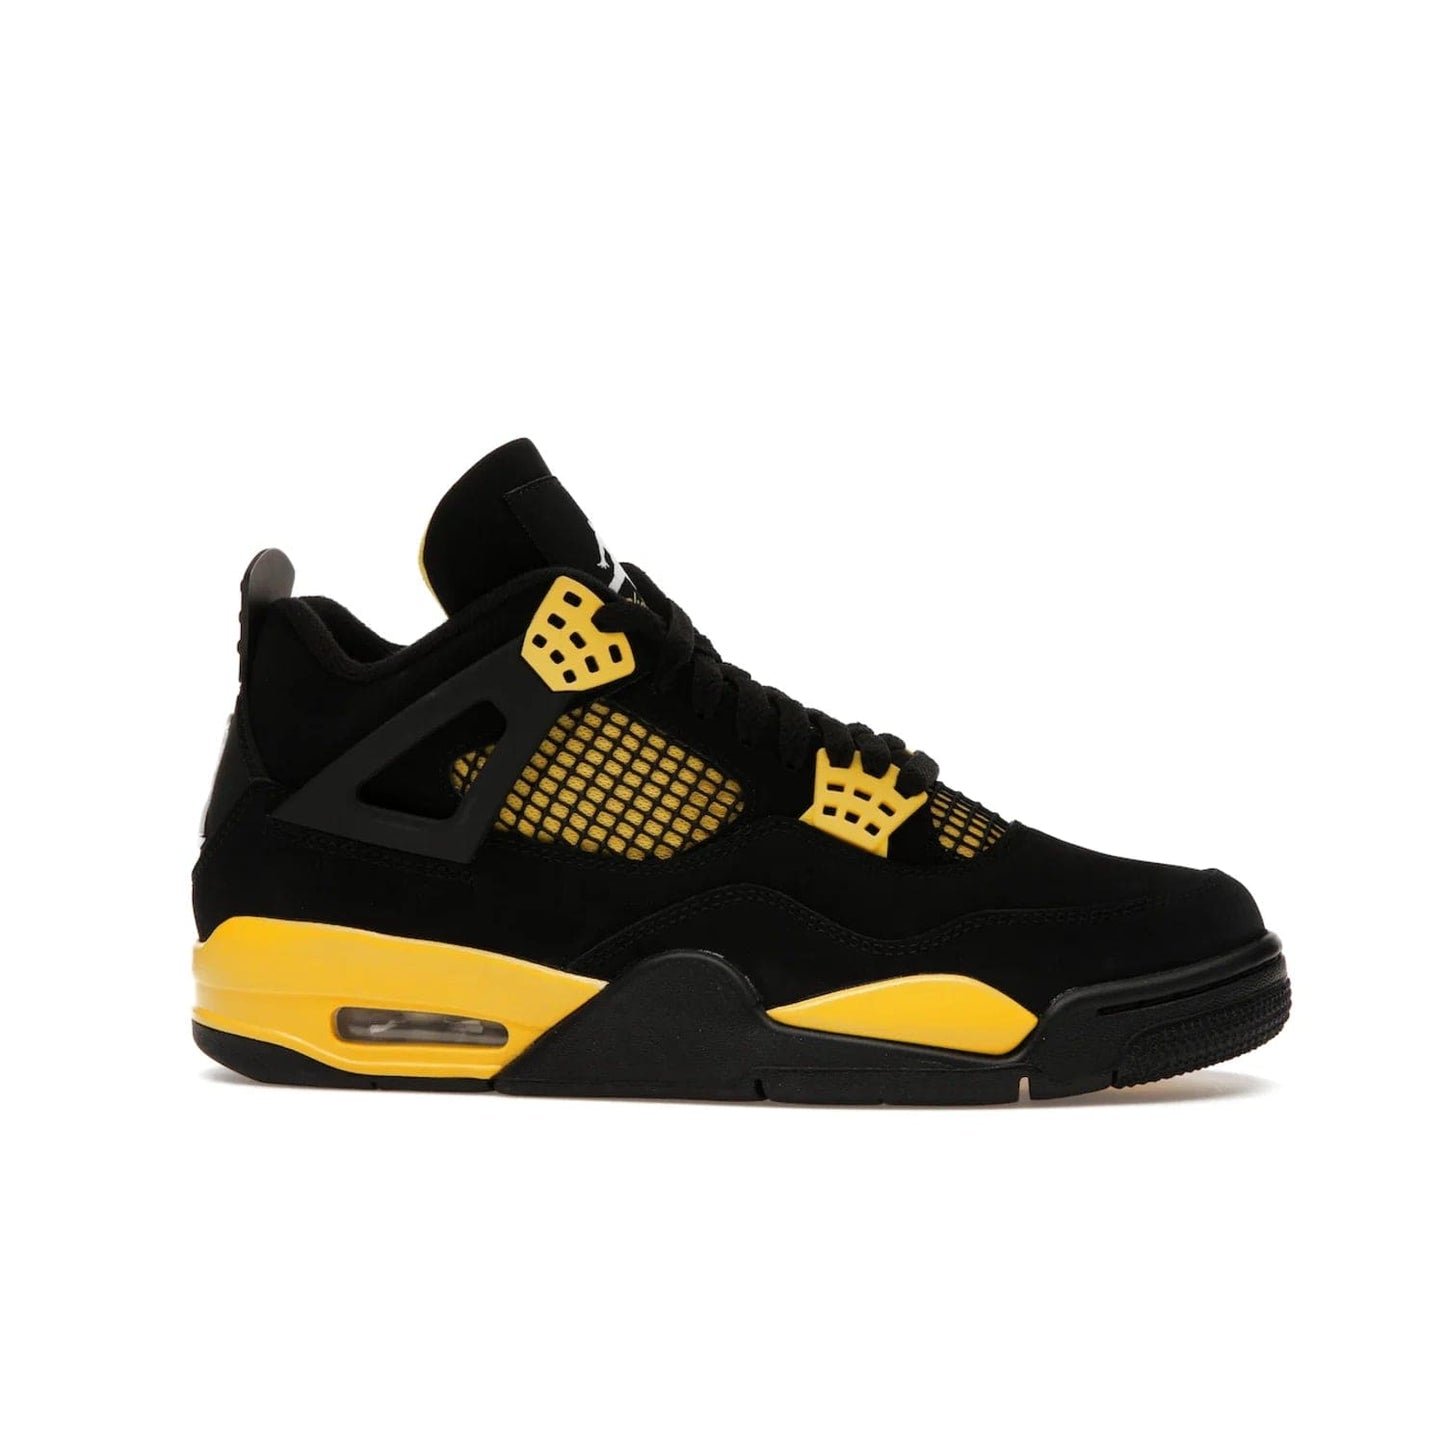 Jordan 4 Retro Thunder (2023) - Image 2 - Only at www.BallersClubKickz.com - Iconic Air Jordan 4 Retro Thunder (2023) returns with black nubuck upper and Tour Yellow details. Featuring Jumpman logo on heel tab, tongue and insoles. Dropping May 13th, 2023.